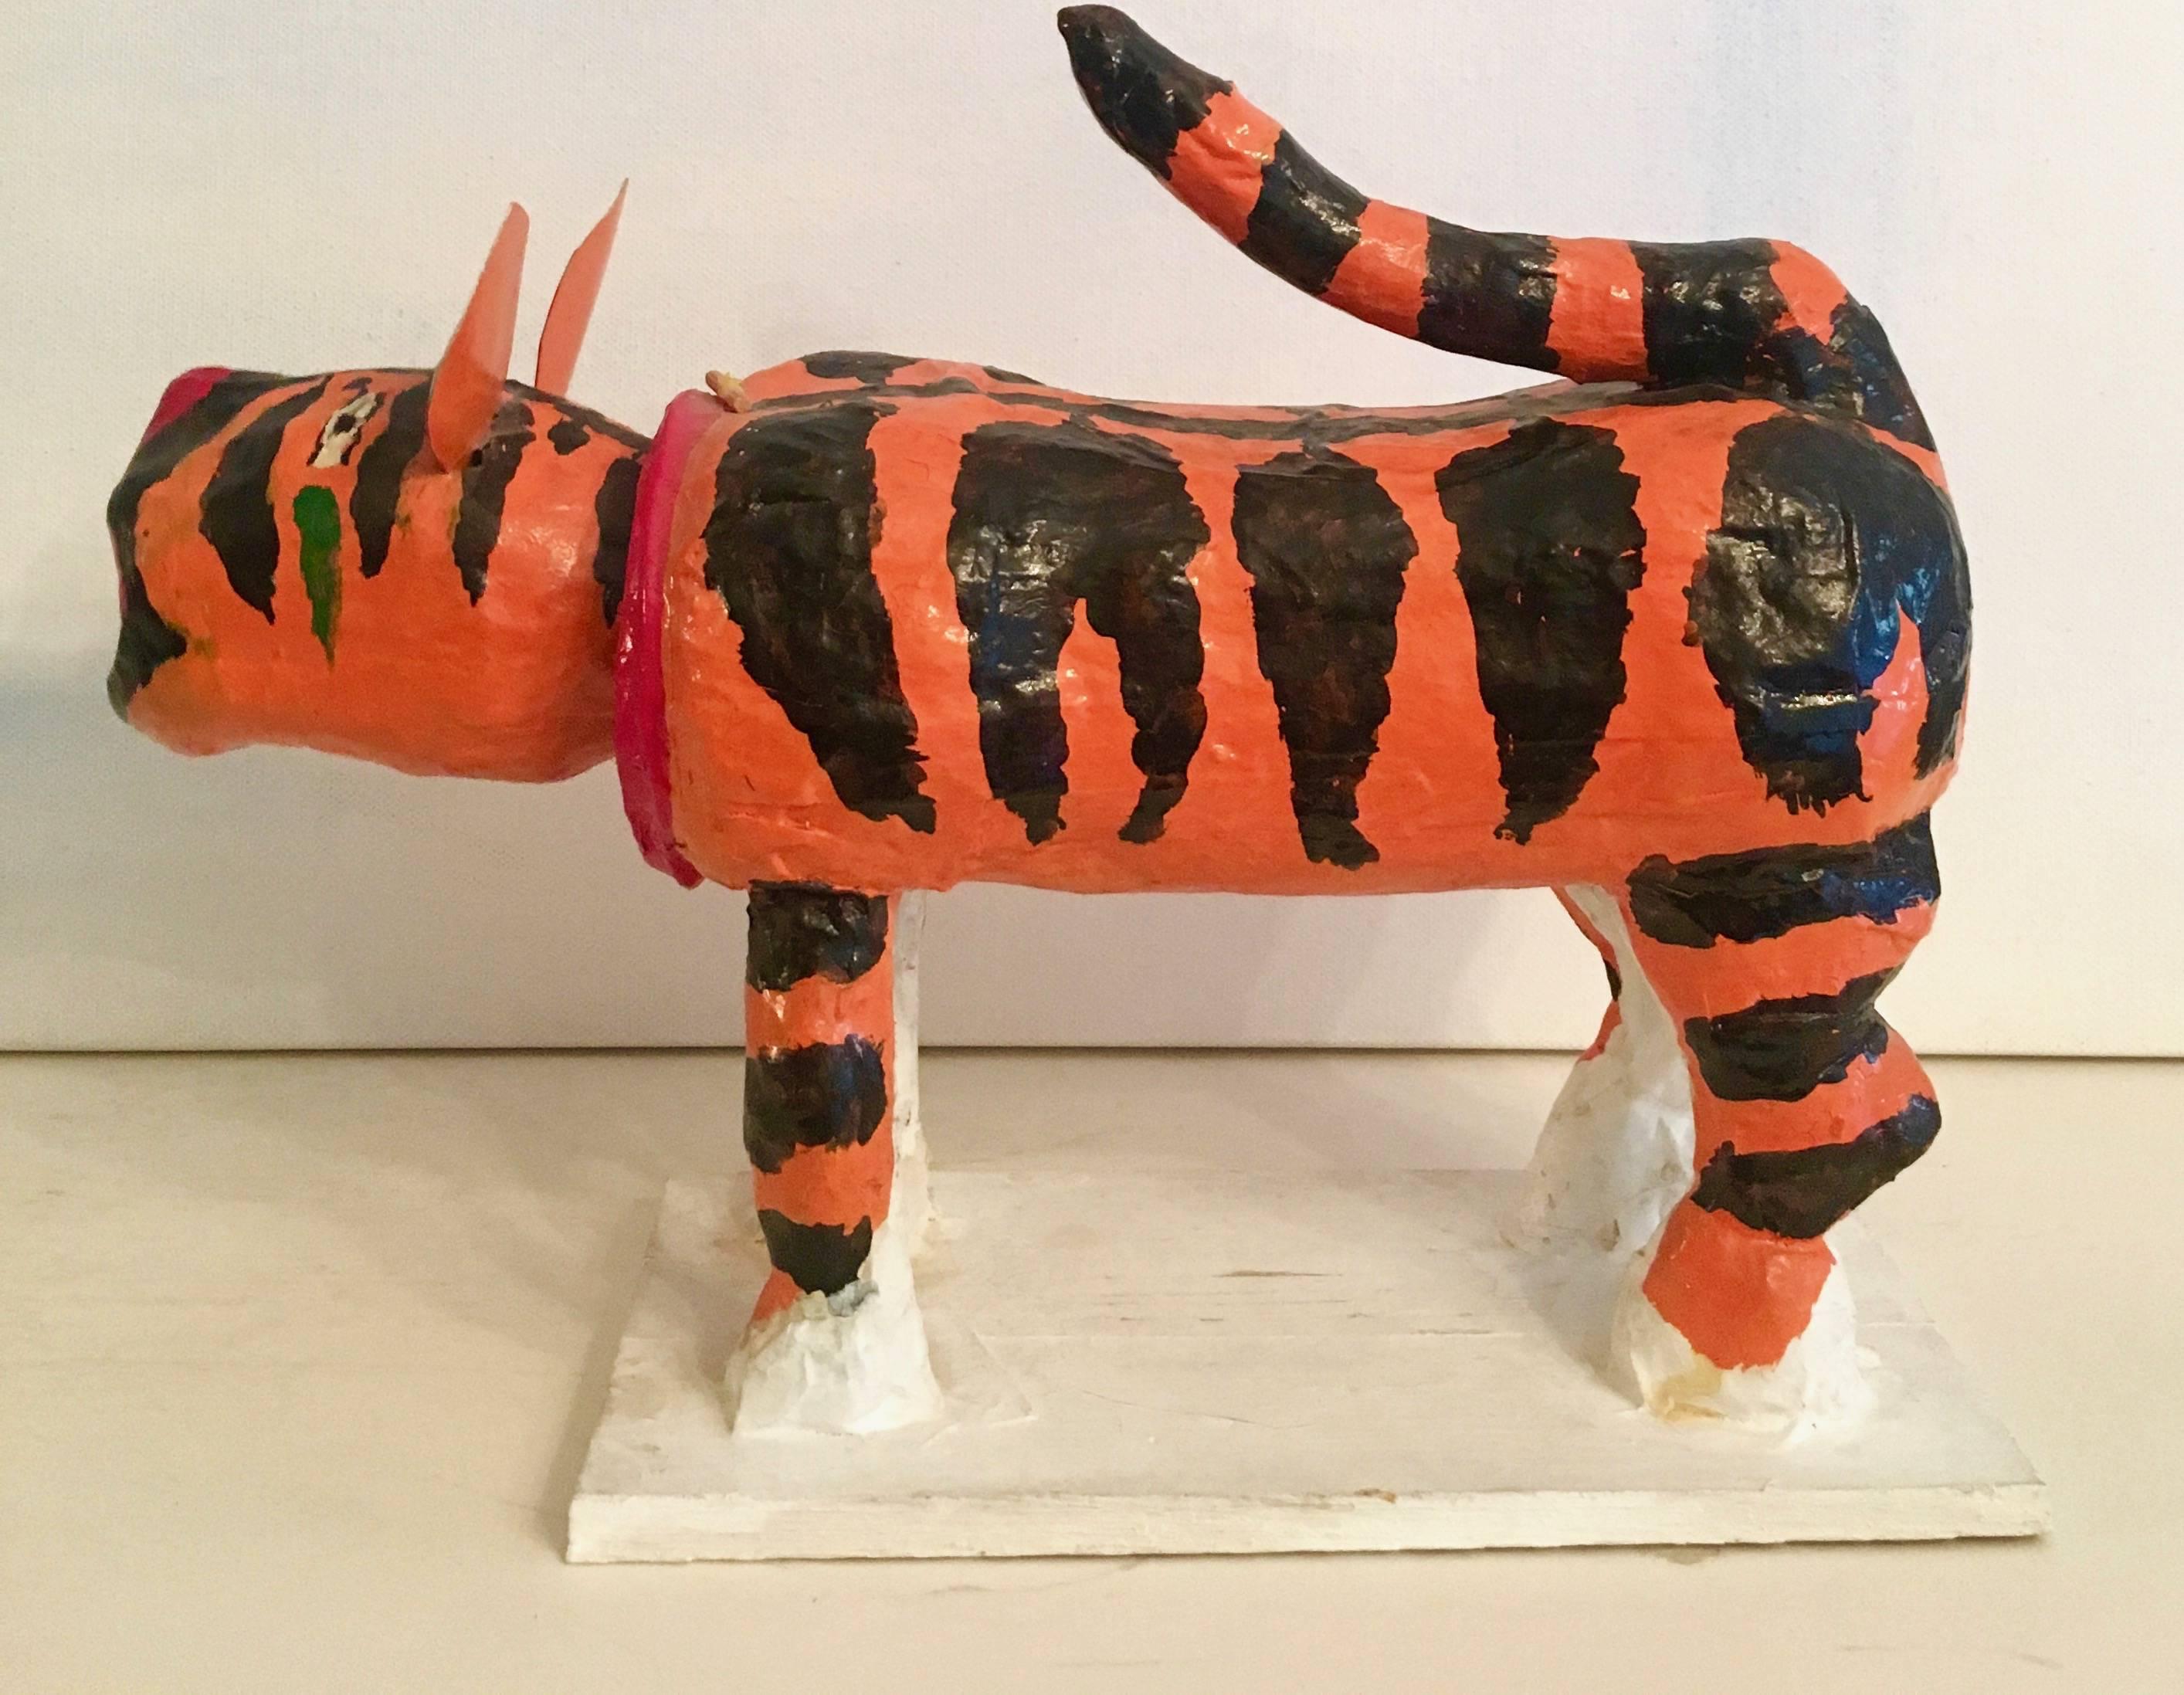 Japanese papier mâché lion is an empeccable display of stunning Japanese Folk Art. The vibrant orange colored lion not only speaks volumes through size and design, but his head Bobbles! a handmade piece sure to create, not only a great look for any